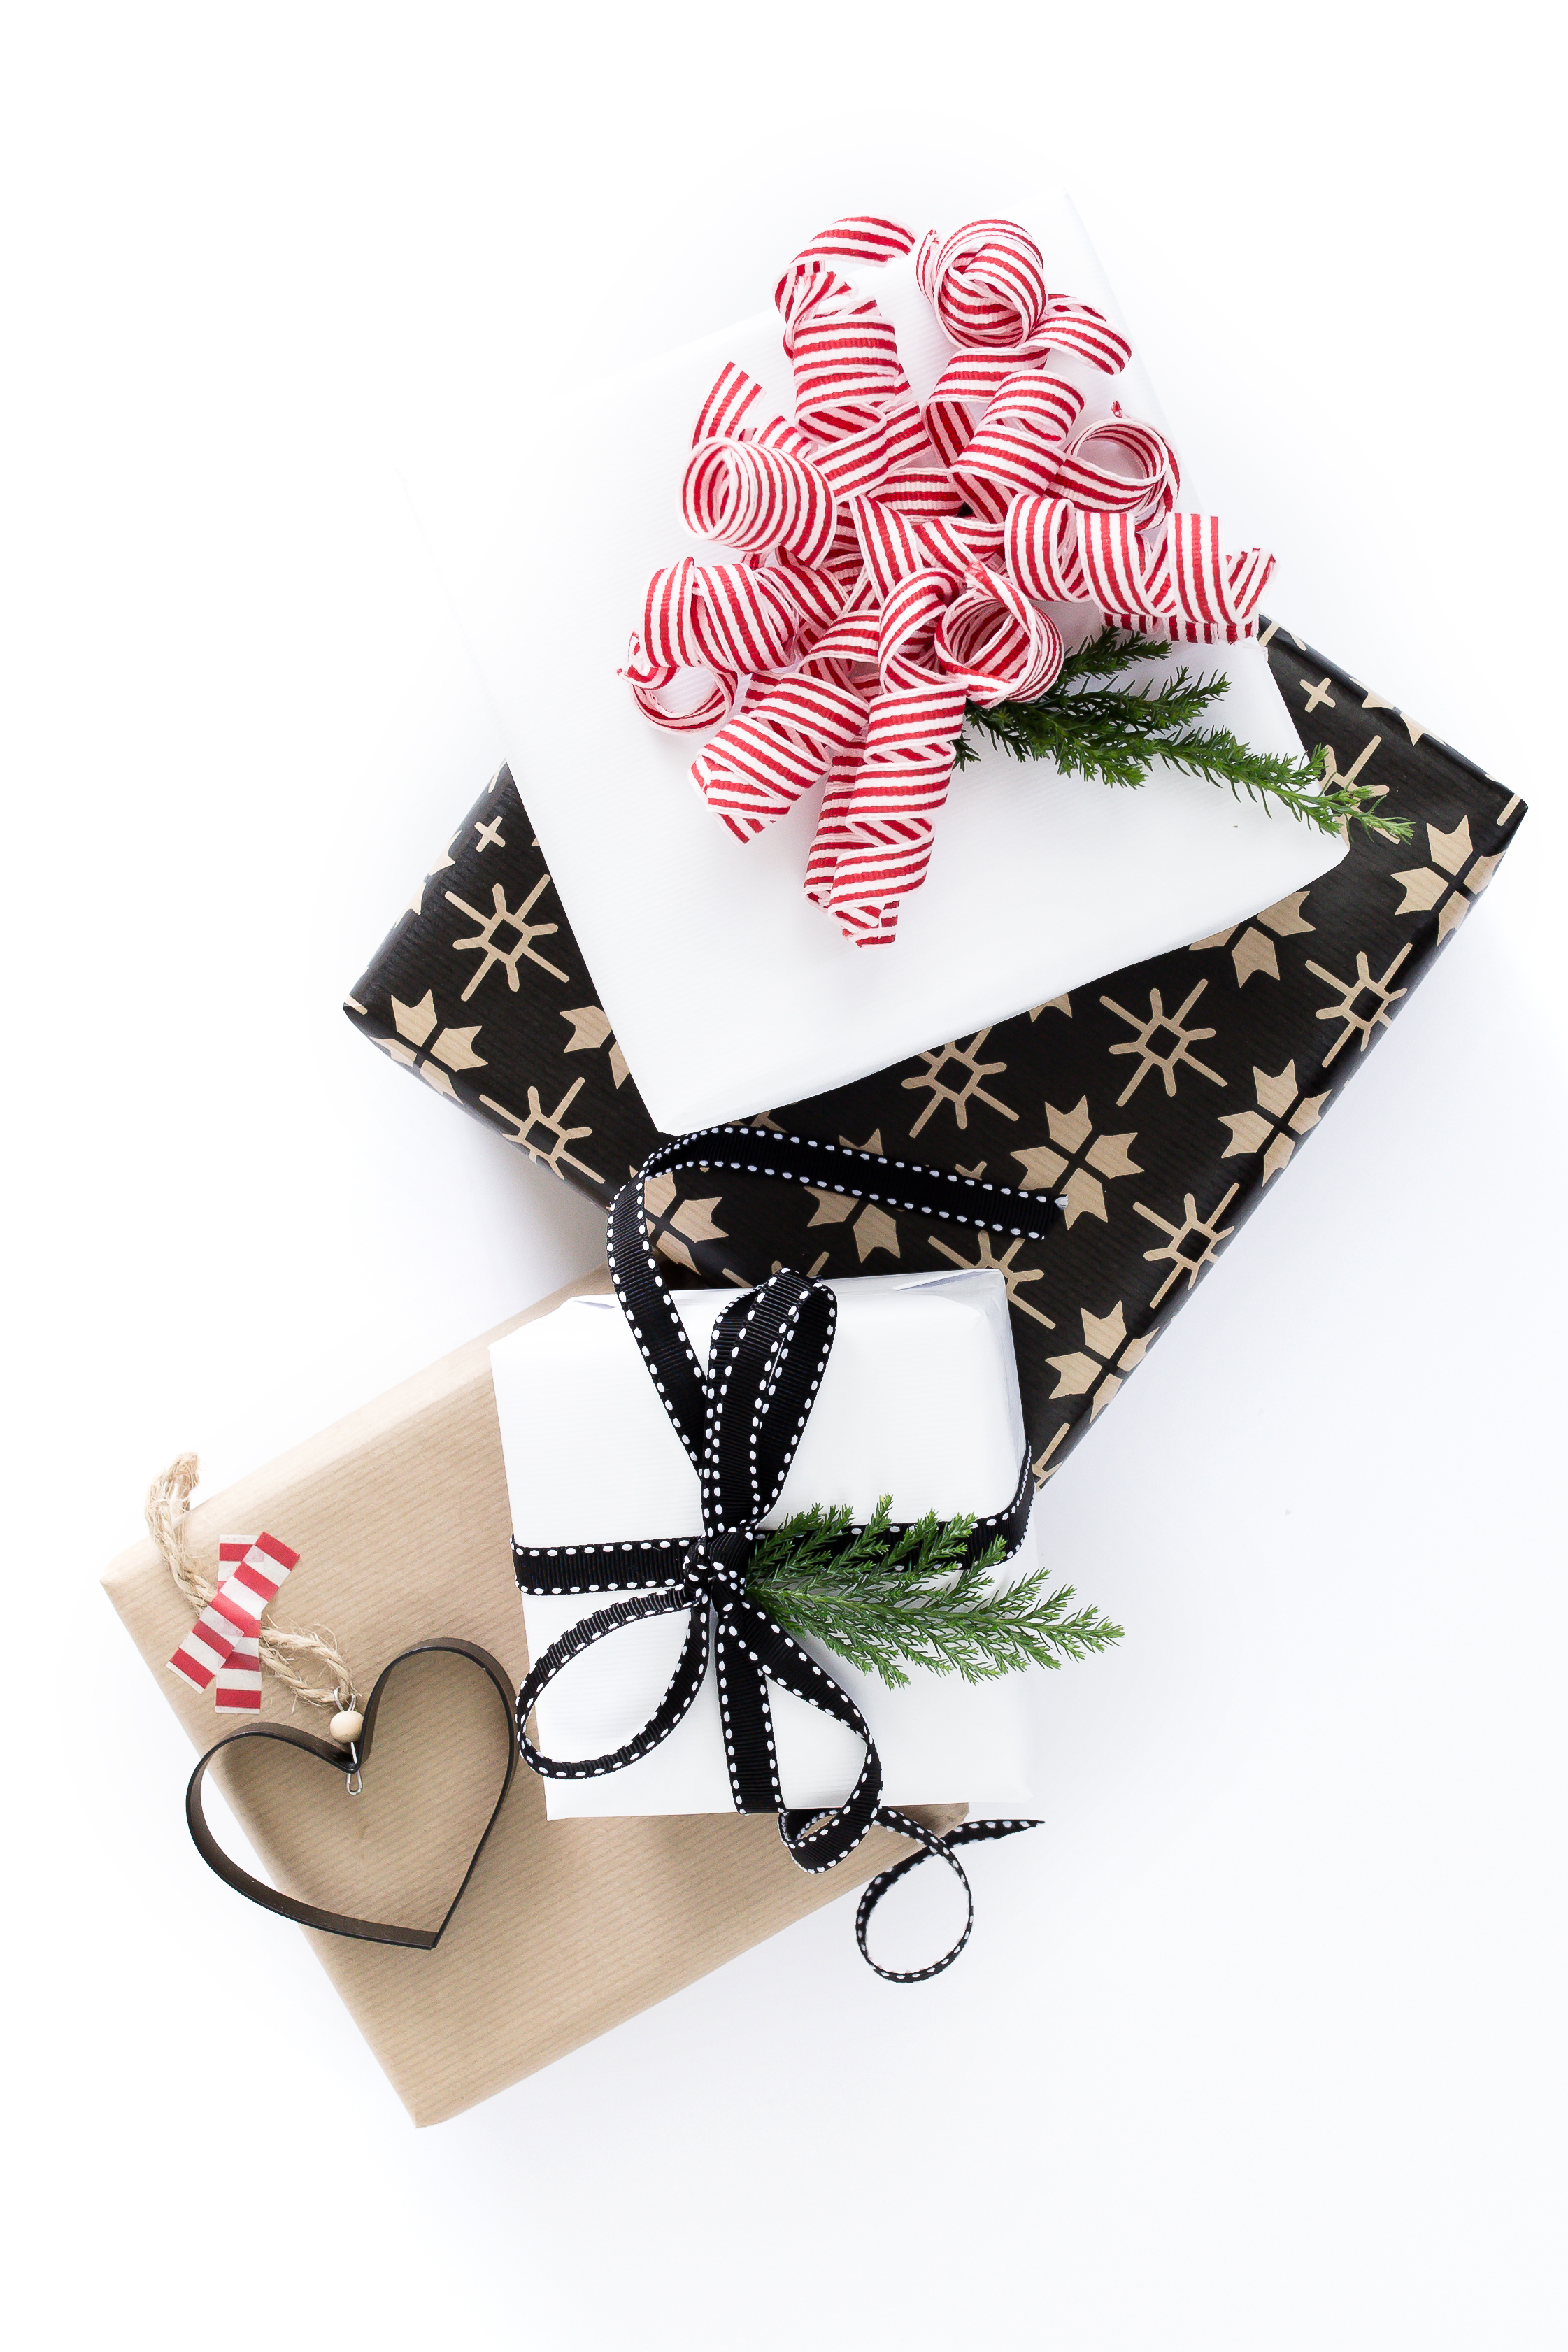 haute-chocolate-styled-stock-photography-holiday-wrapping-baking-party-4-final